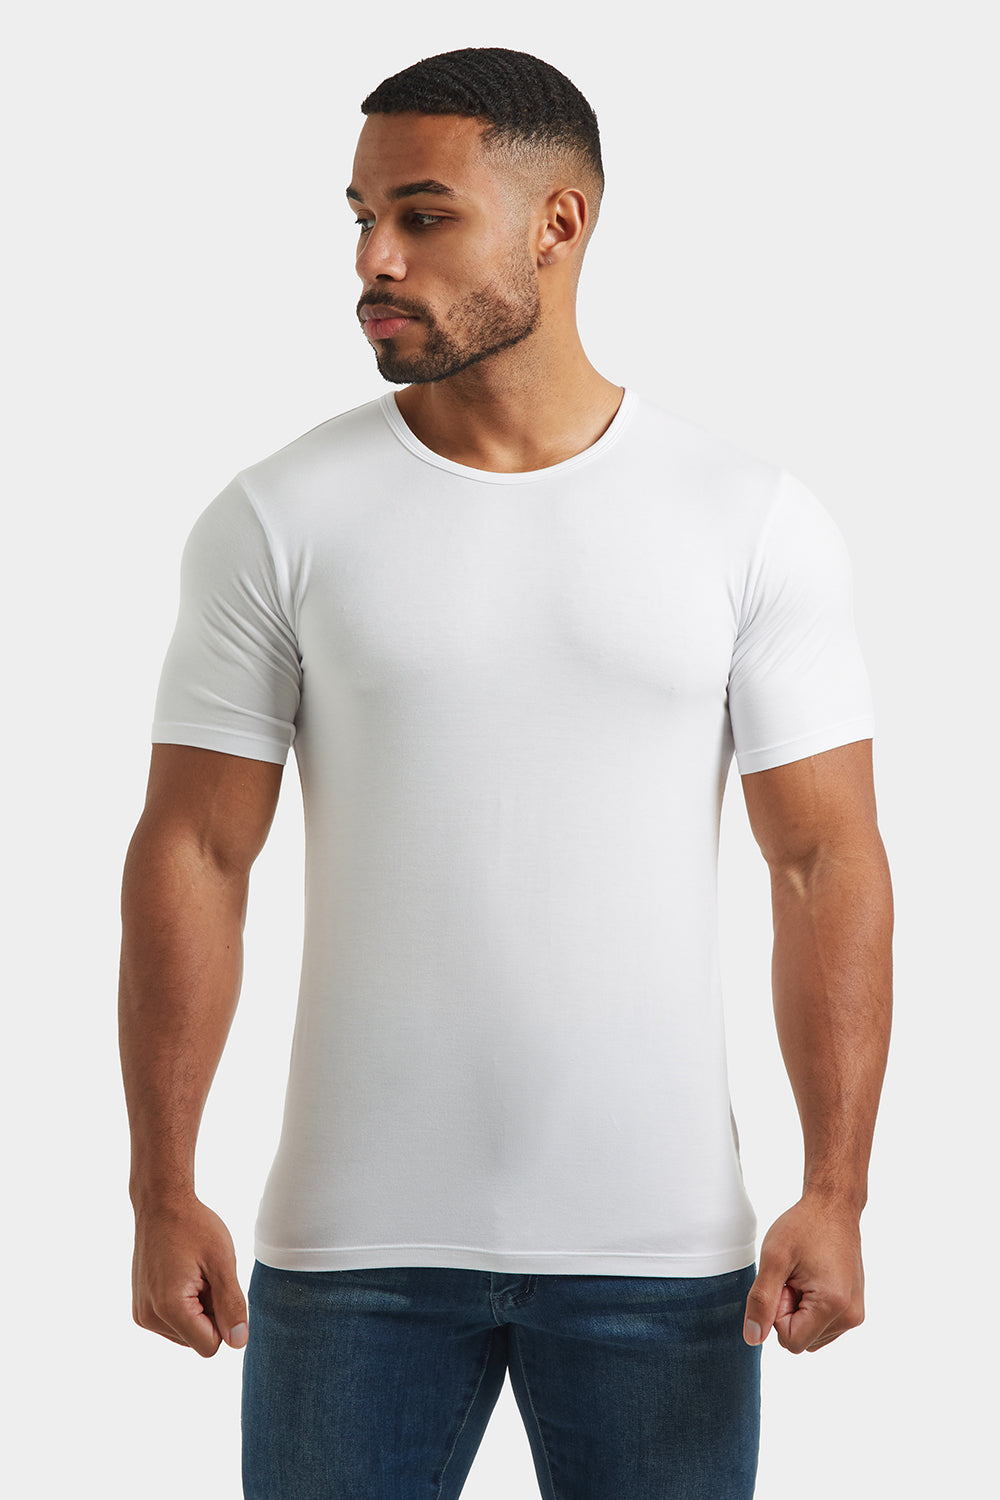 Fashion Fit T-Shirt in White - TAILORED ATHLETE - ROW